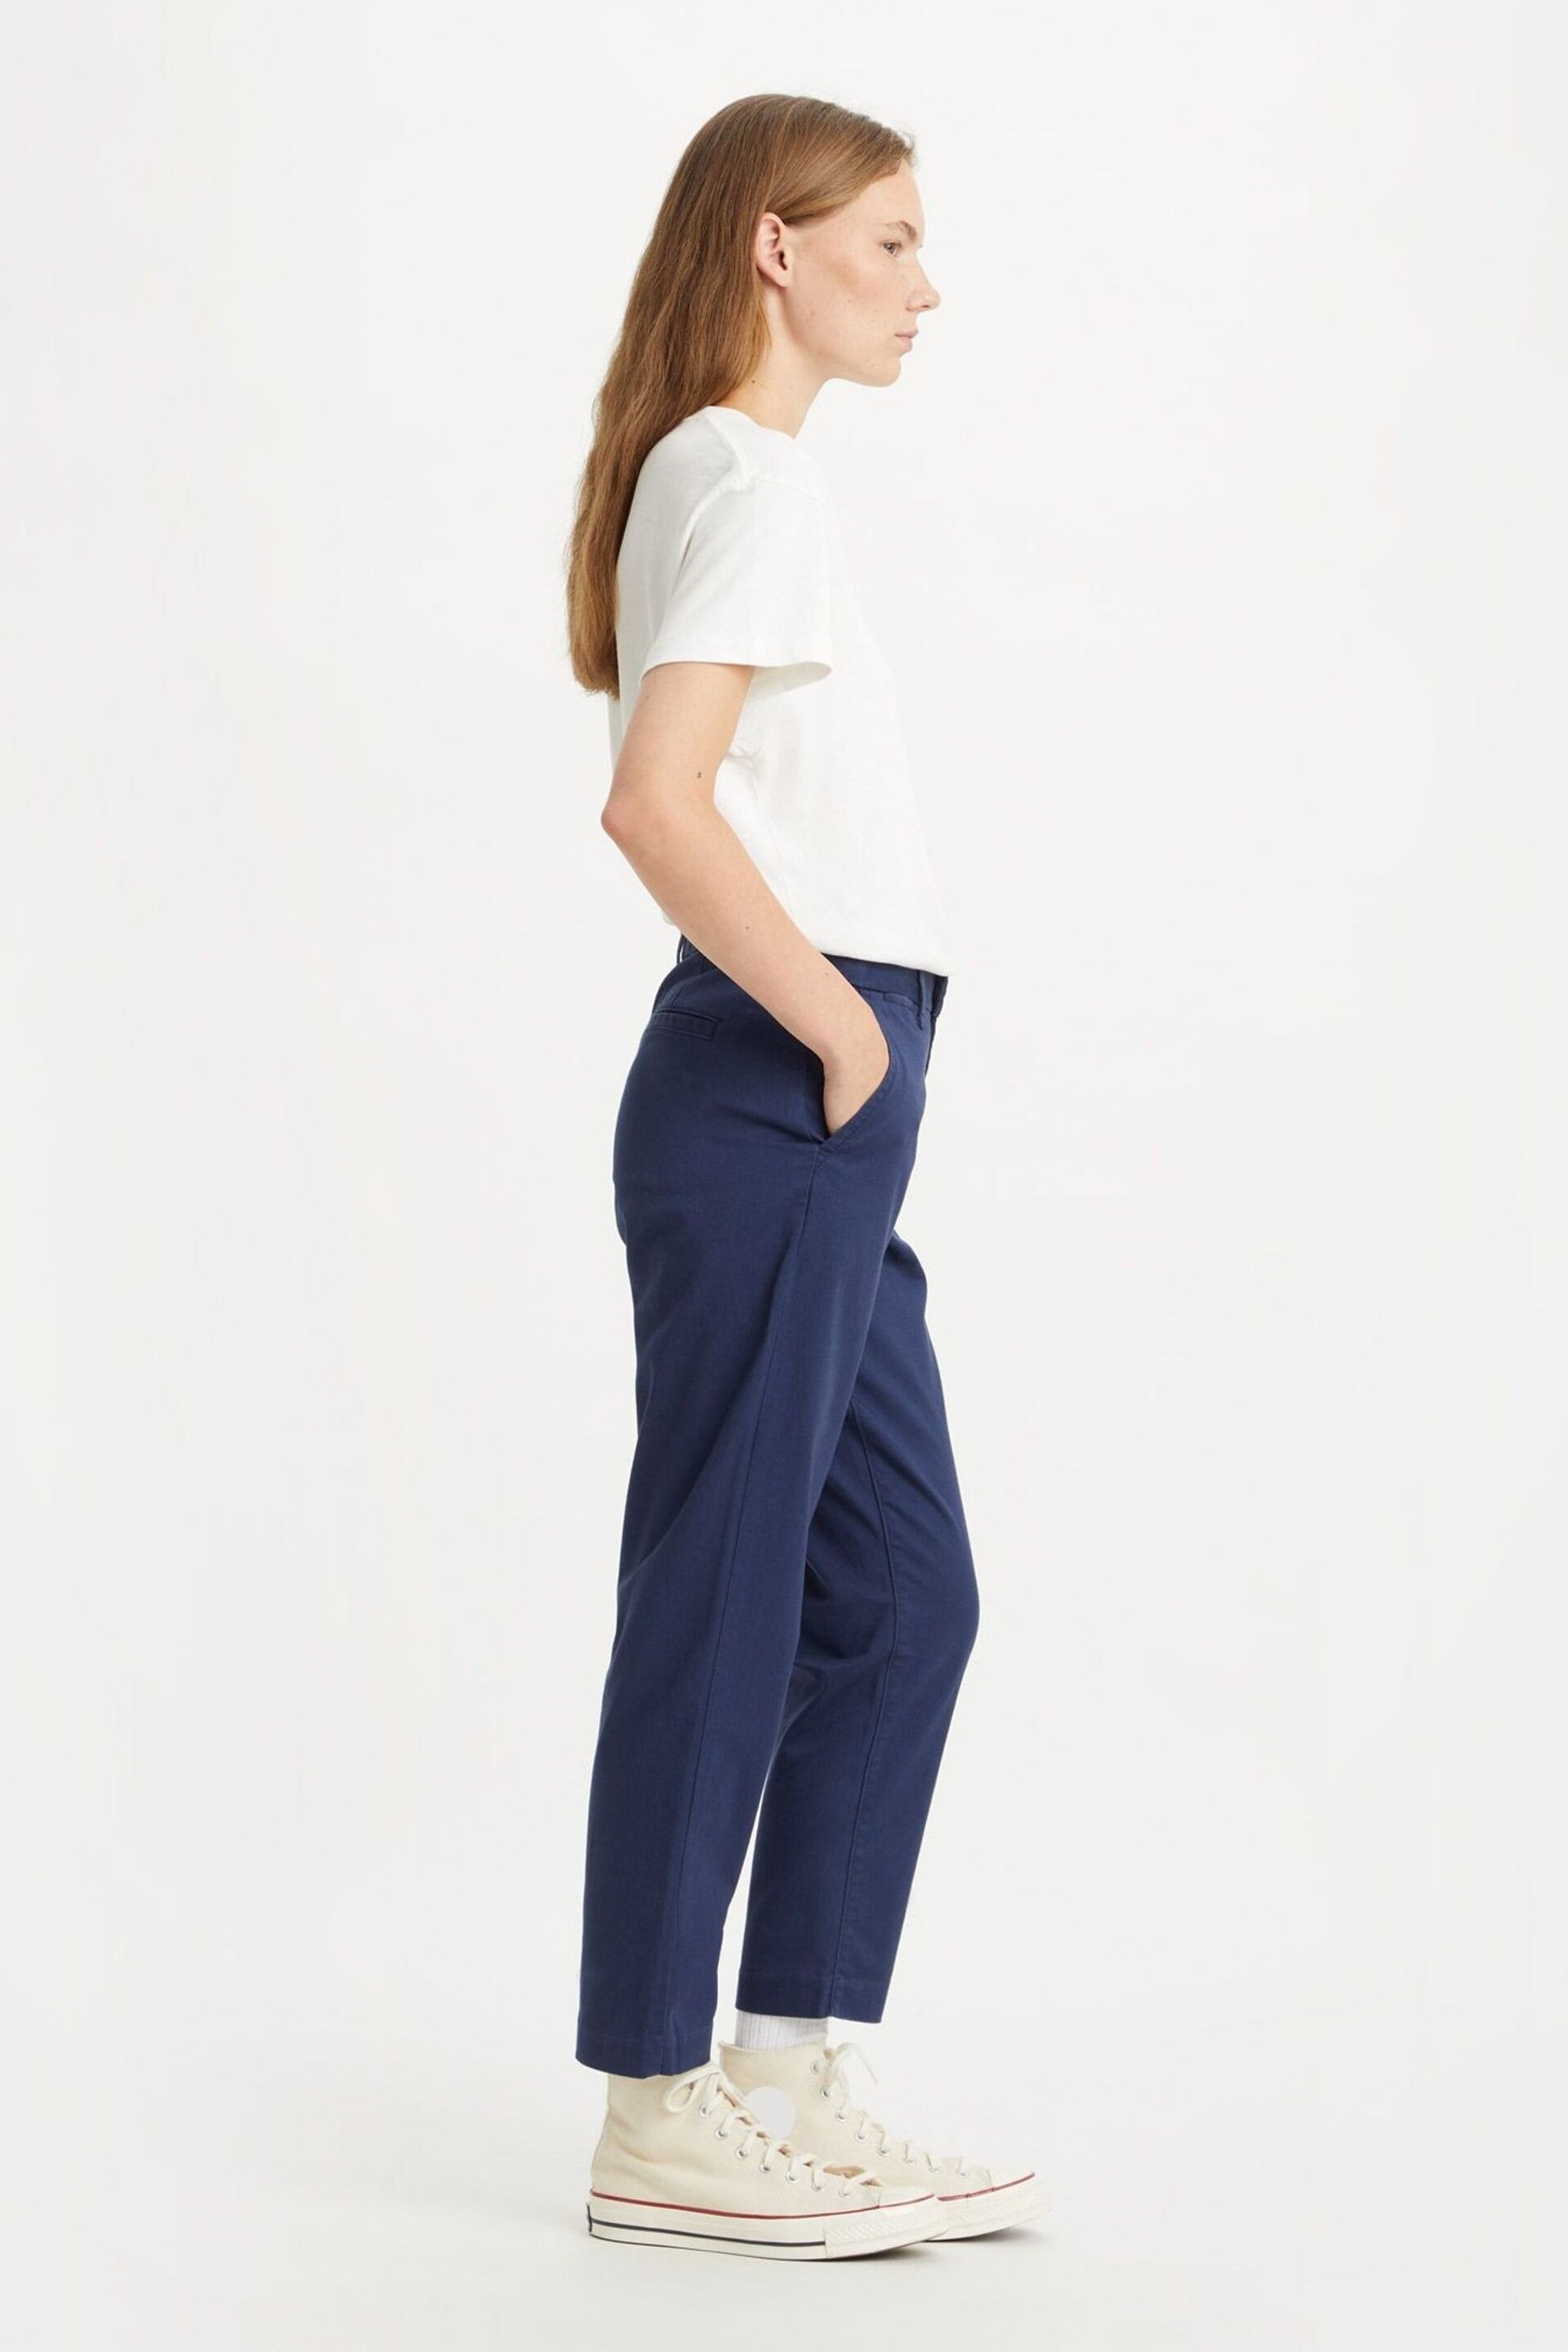 Levi's® Blue Essential Chino Trousers - Image 3 of 3